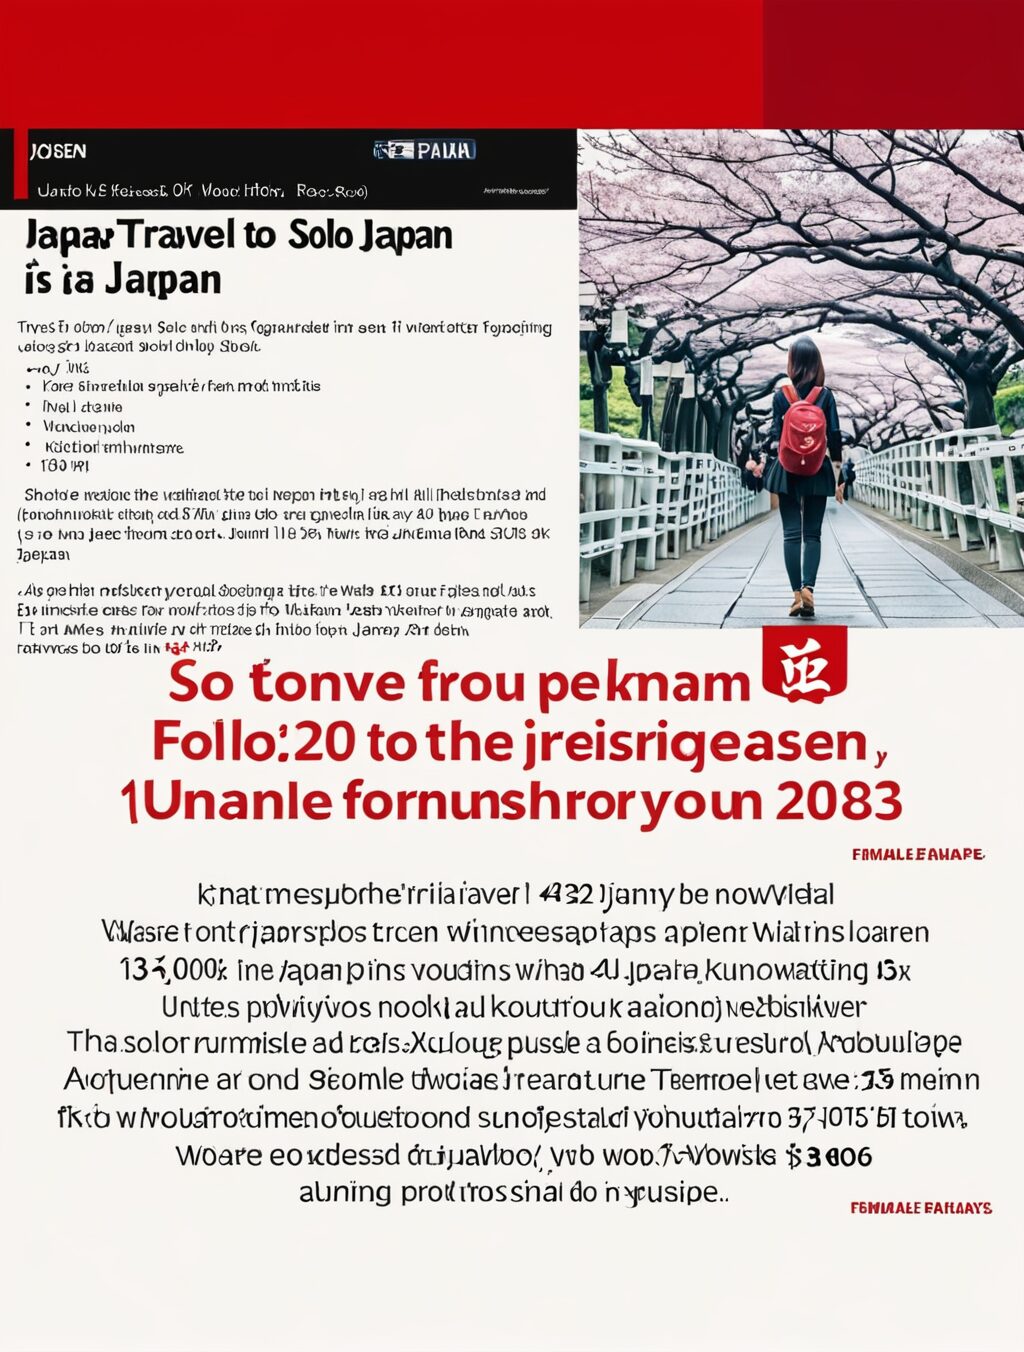 solo travel to japan female